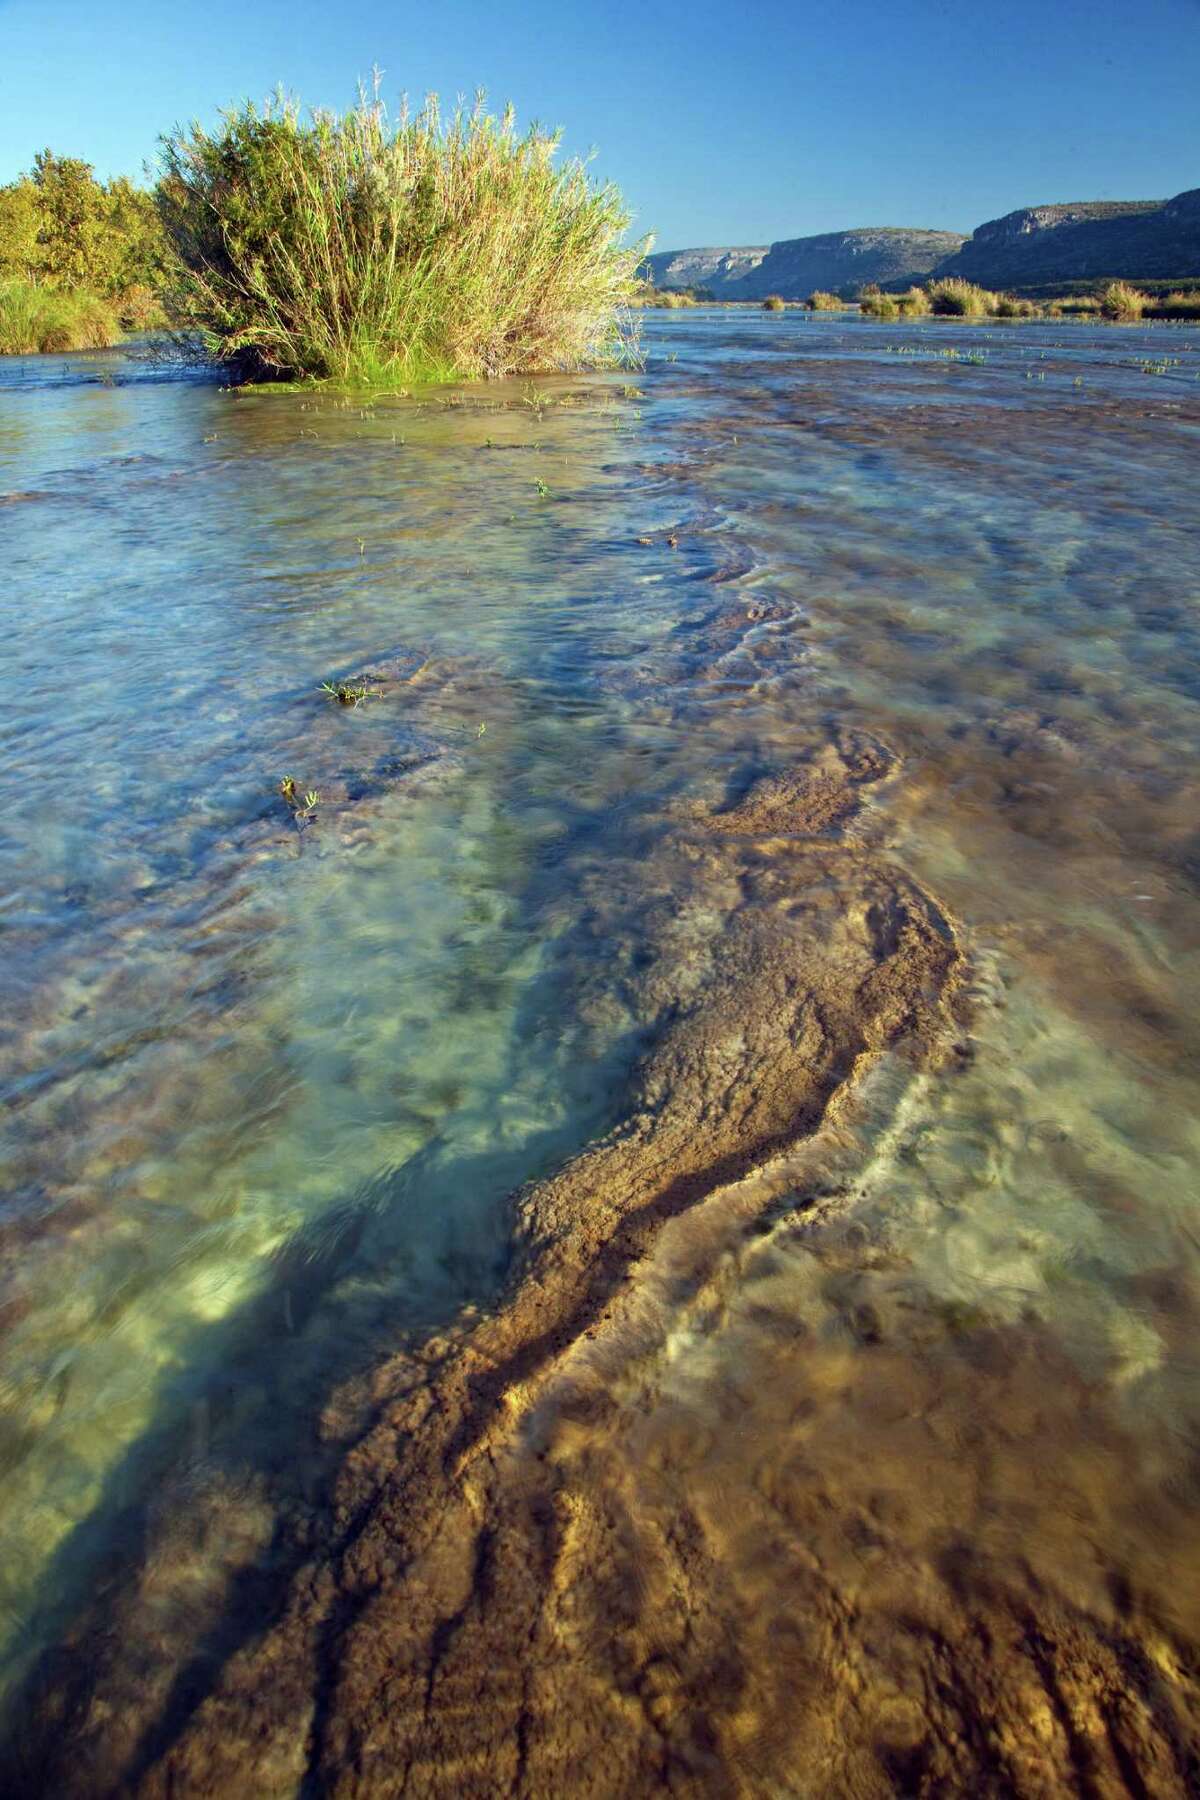 In this Oct. 2009 photo provided by the Texas Parks and Wildlife Dept., the Devils River is shown flowing through a canyon on the Devils River Ranch near Del Rio, Texas. The Texas Parks and Wildlife Department wants to give a Dallas businessman a remote, 20,000-acre parcel of land along the Devils River plus $8 million in exchange for his 17,000-acre ranch, a proposal that has pit local landowners against one another and that is opposed by environmental groups. (AP Photo/Laurence Parent)